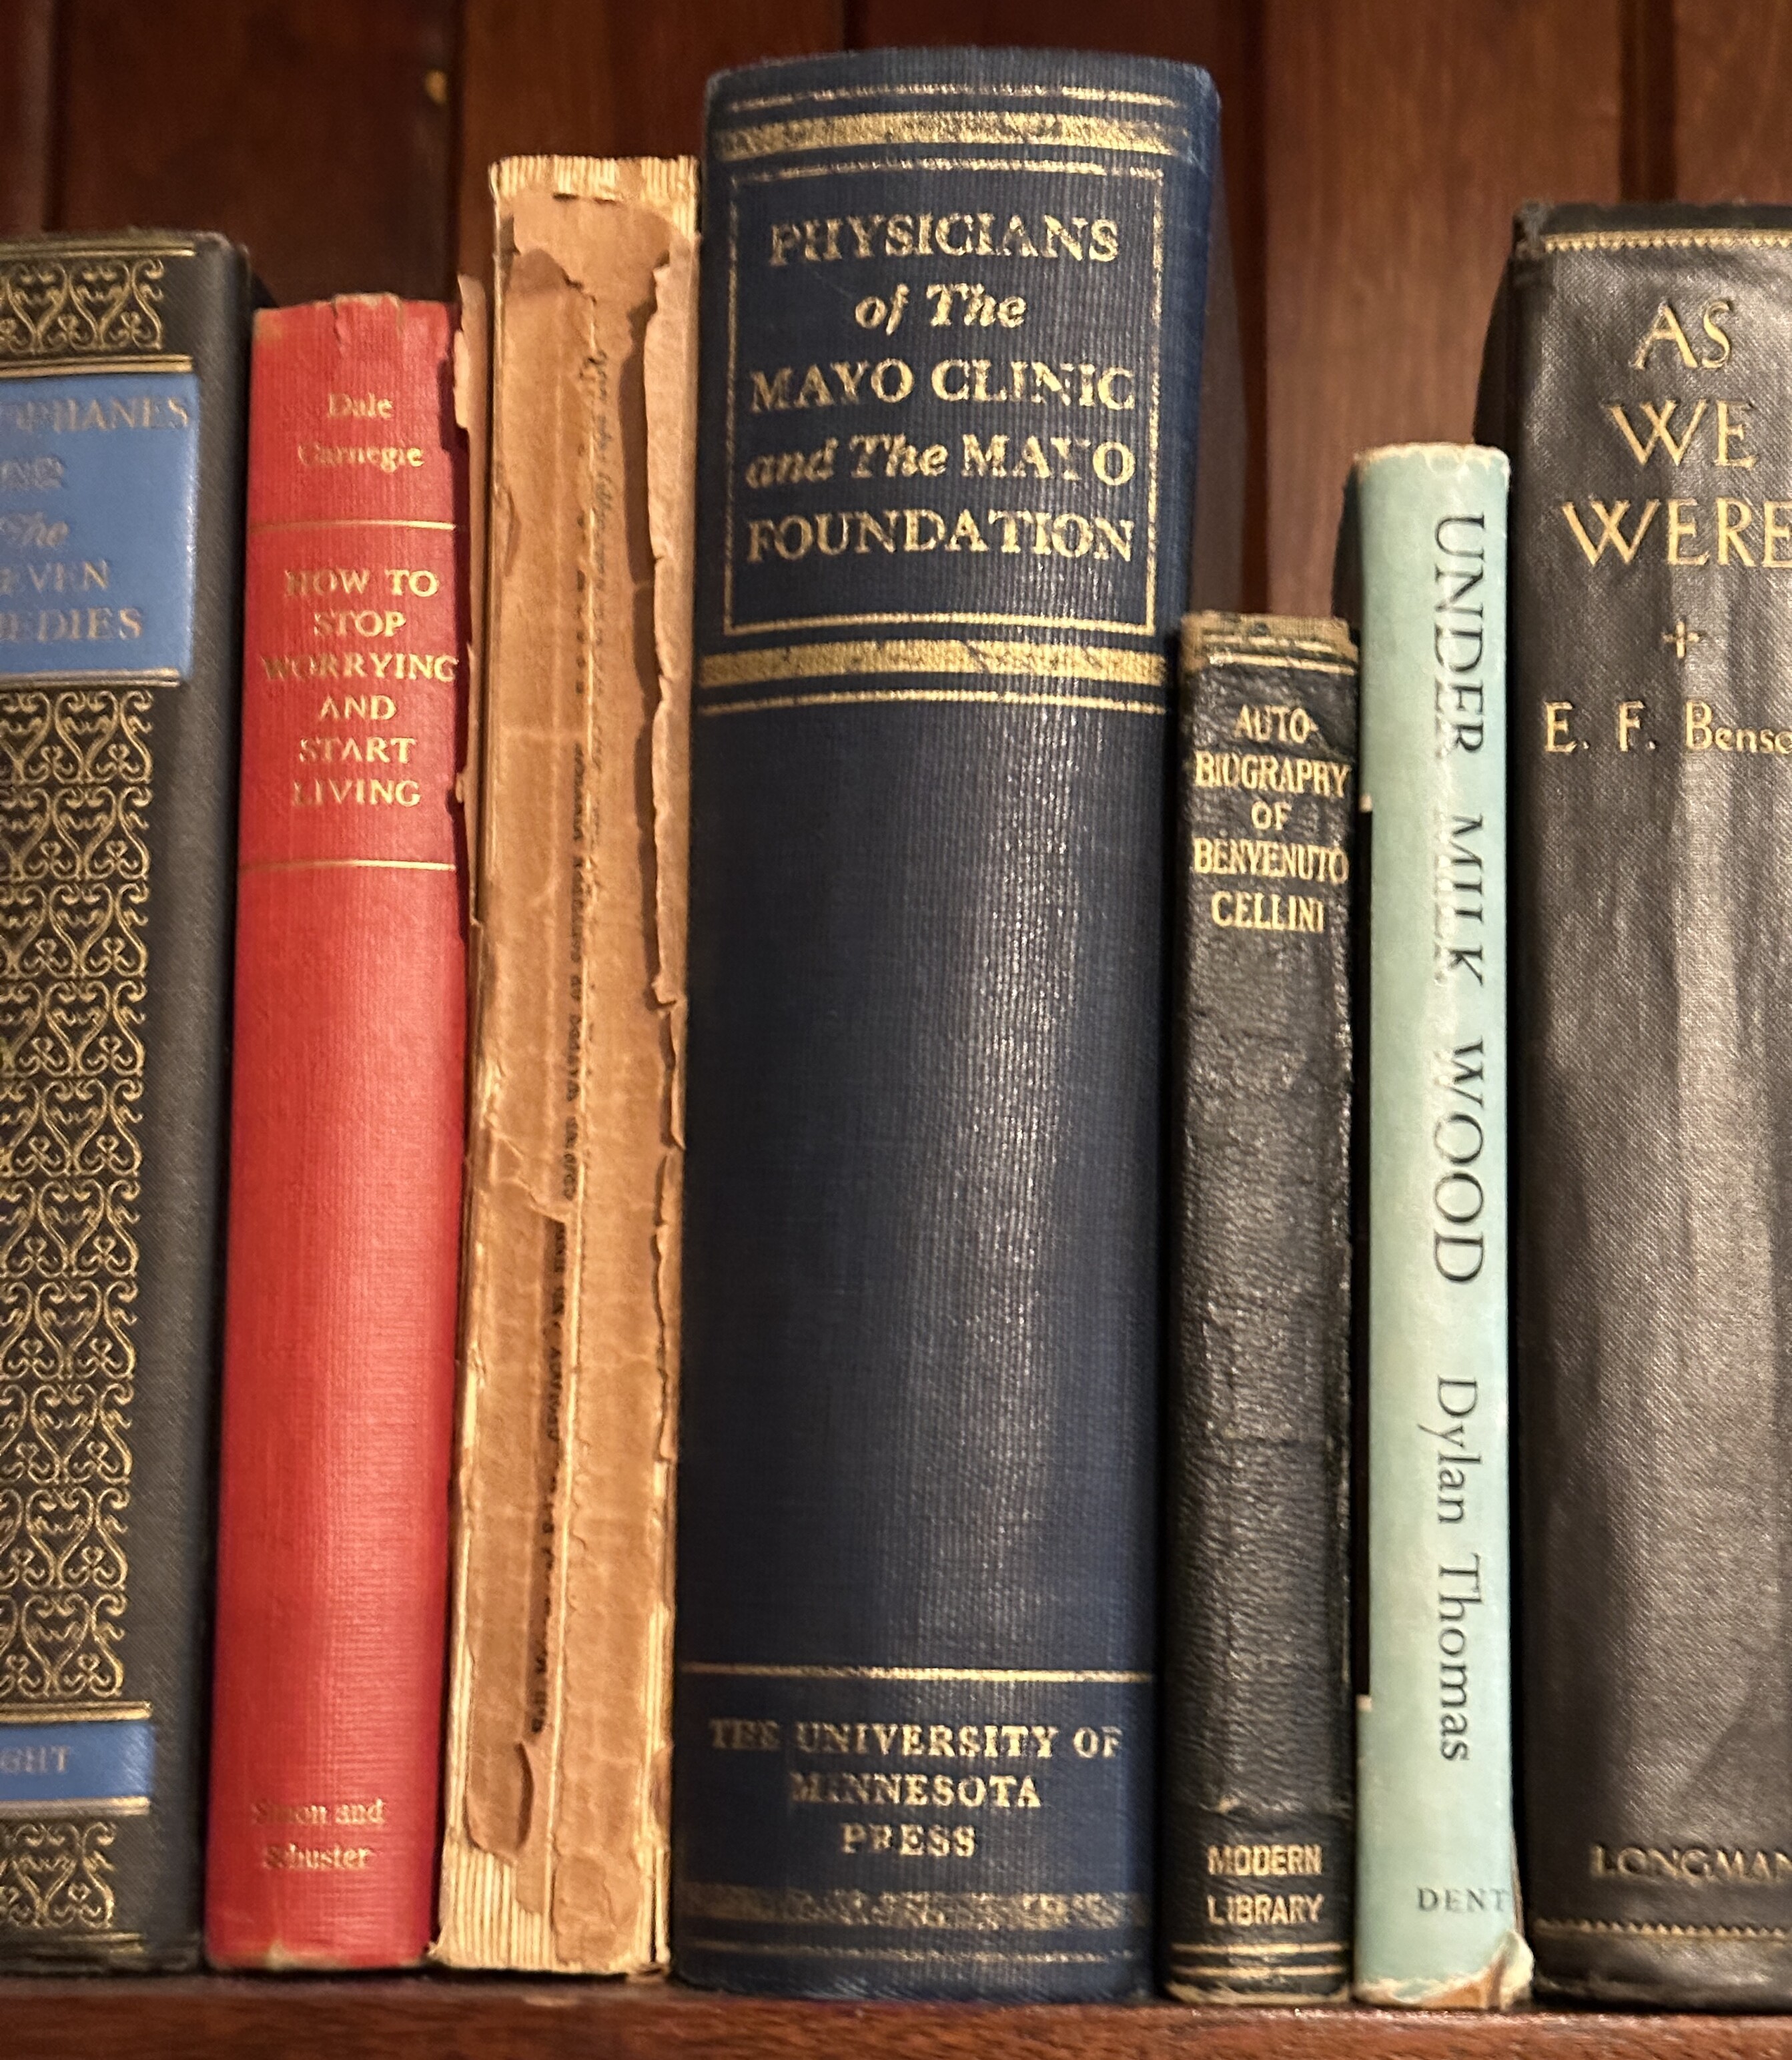 Bookshelf in the library at the Wilson House with old books, including “Physicians of The Mayo Clinic and The Mayo Foundation” by the University of Minnesota Press